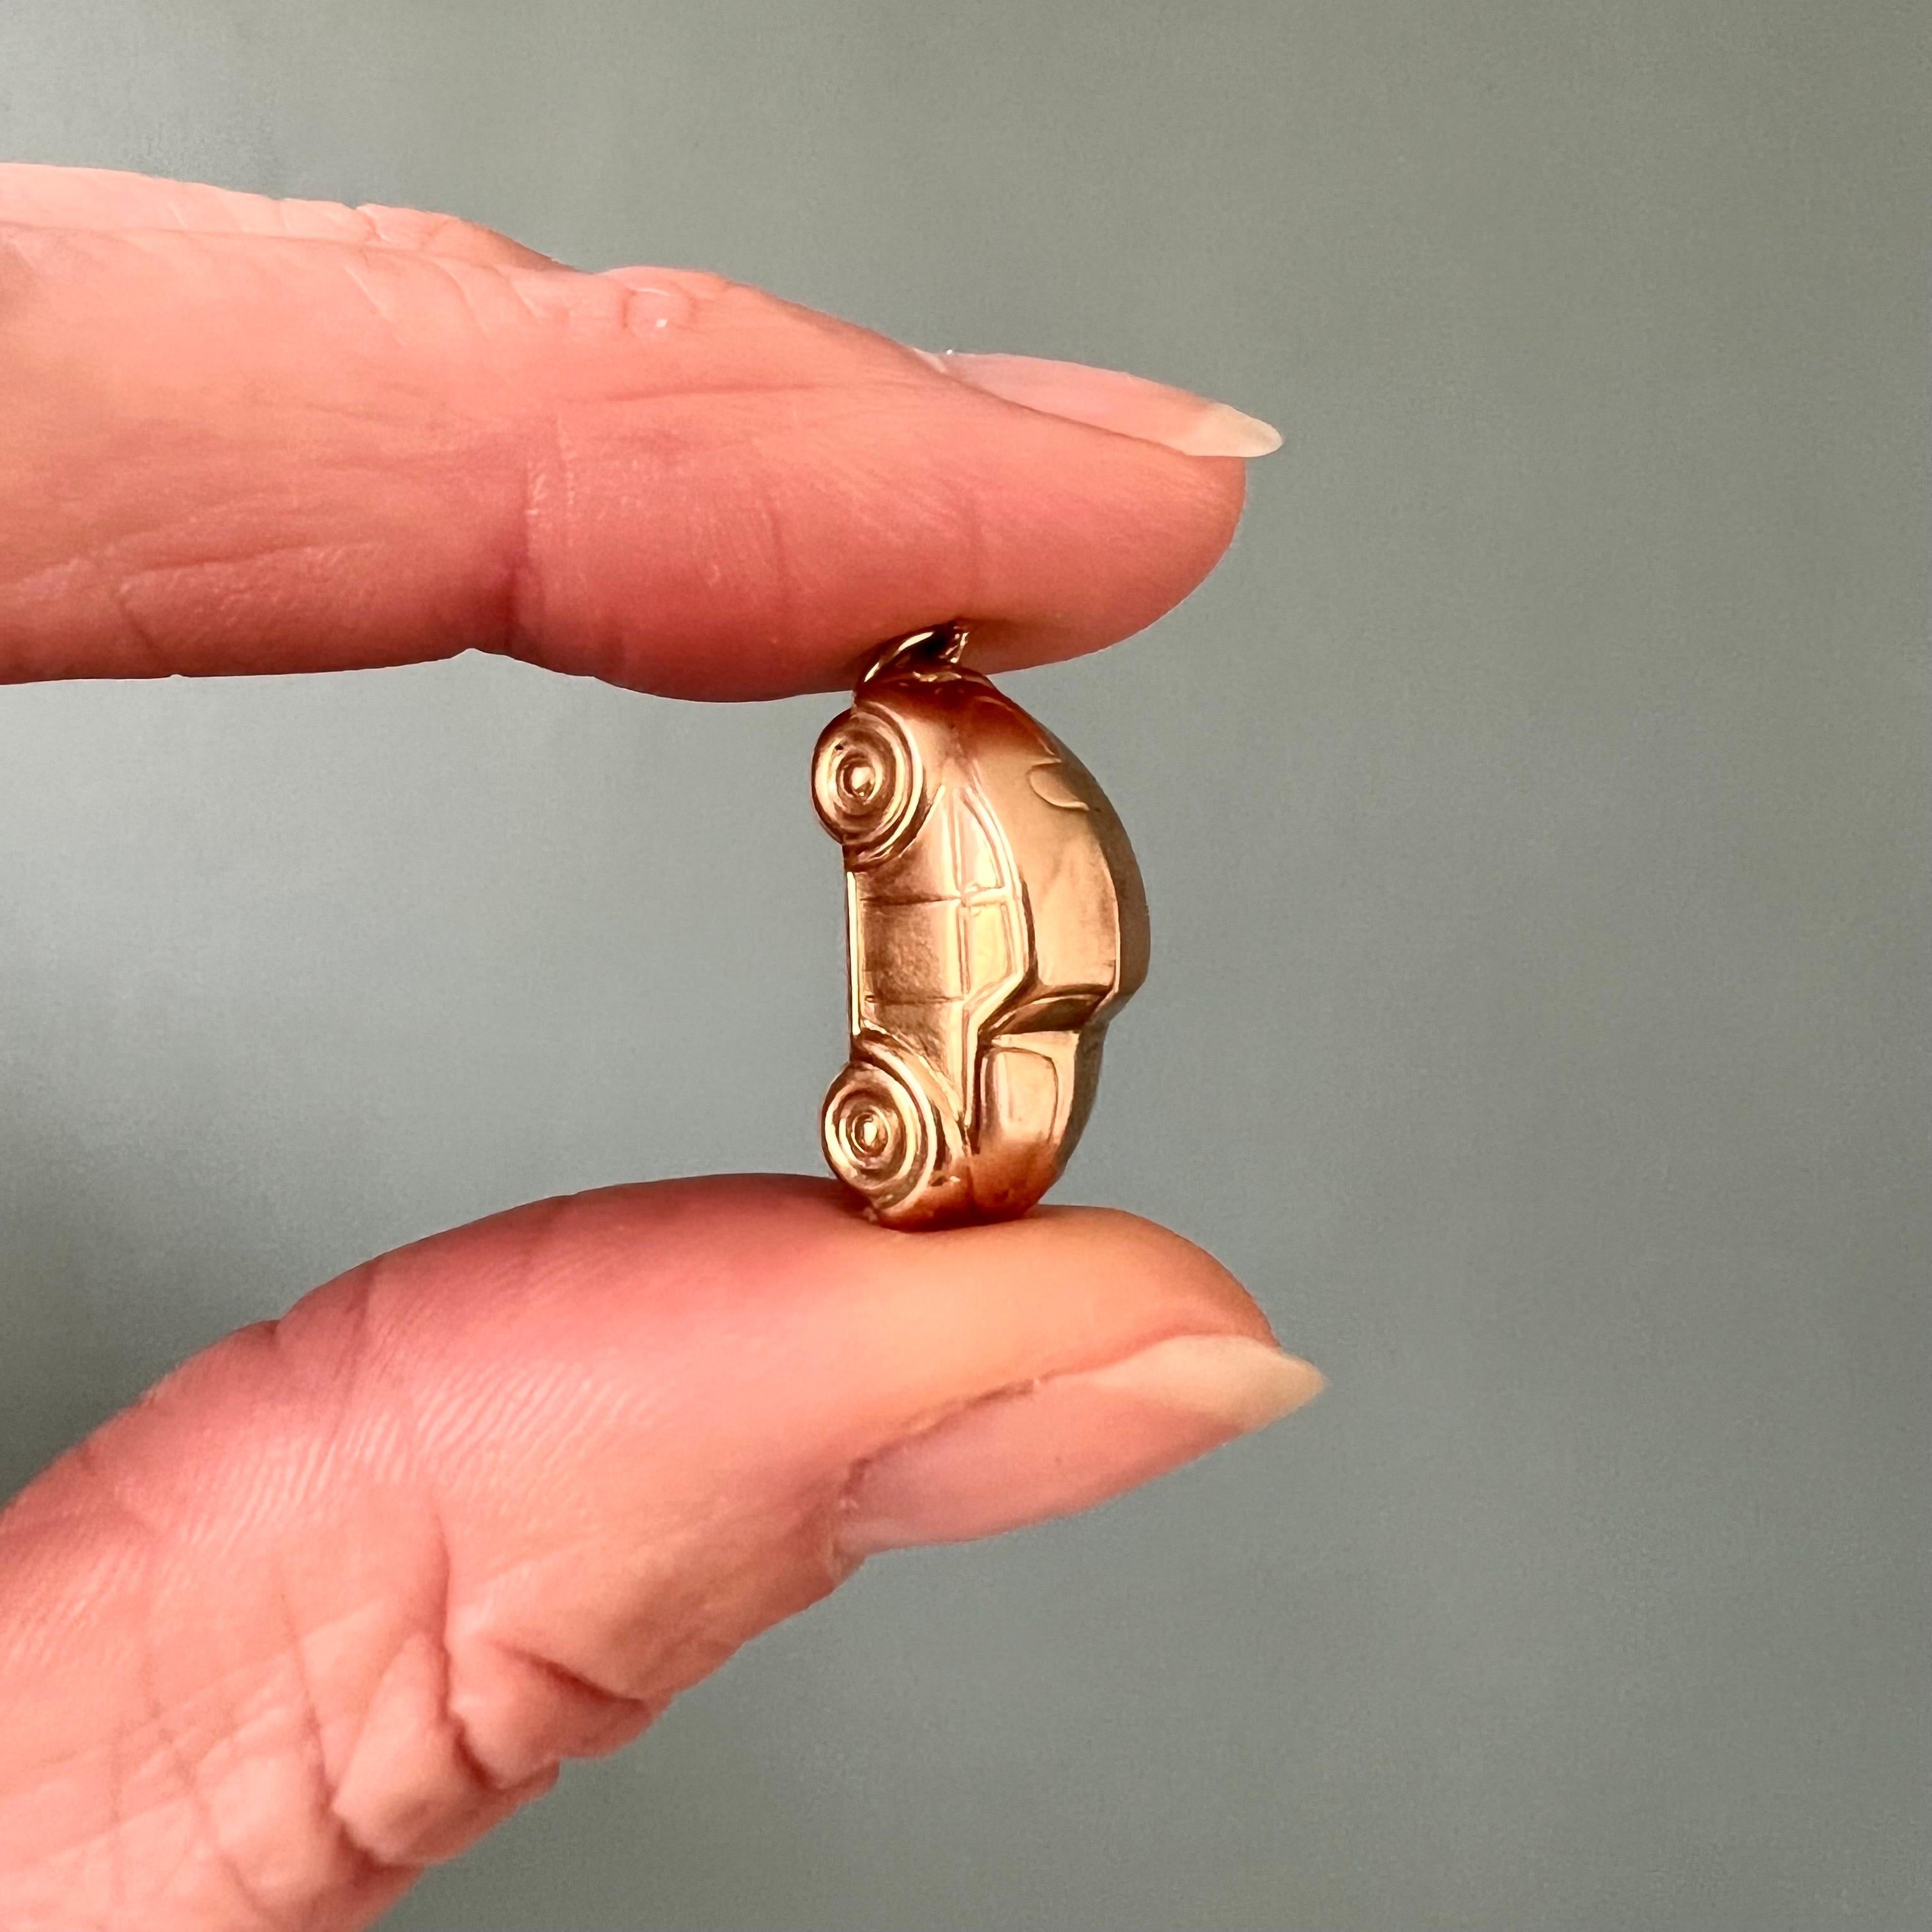 A lovely vintage 14 karat gold Volkswagen Beetle charm pendant. The charm is nicely modeled into a beetle bug wagen which were very popular during the 60's and 70's of the twentieth century. The Volkswagen Beetle is one of the most instantly